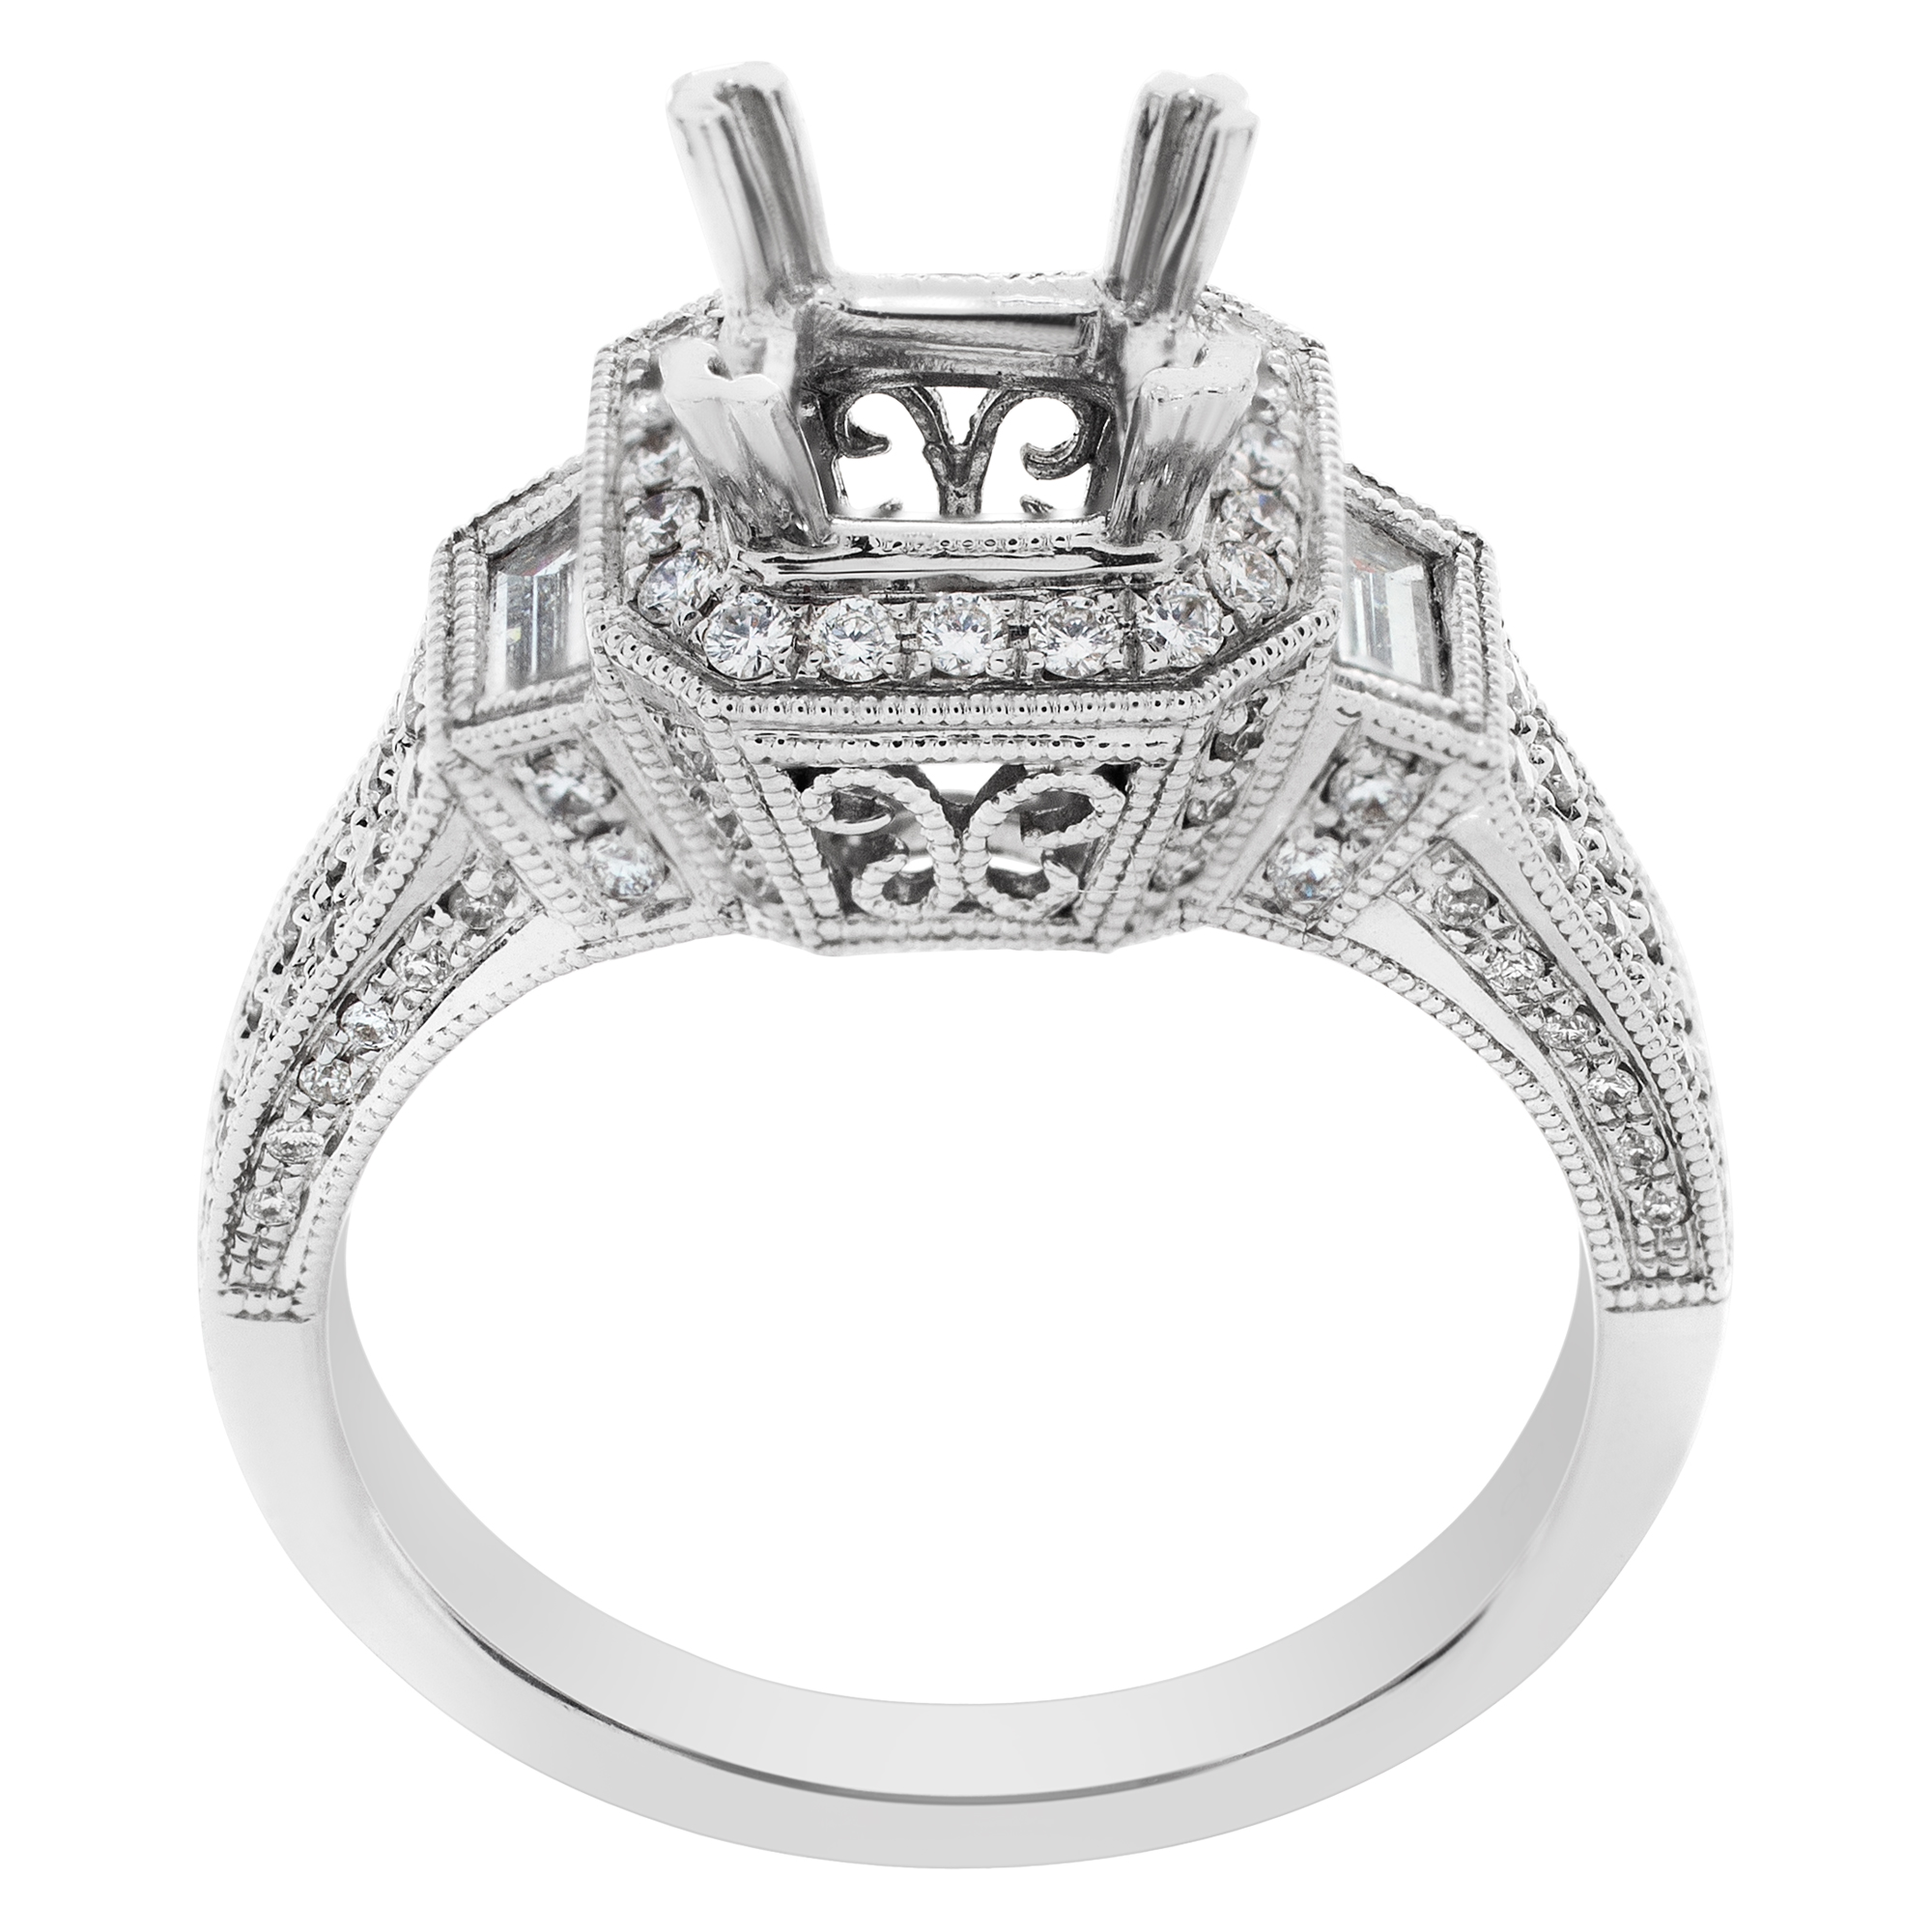 18k white gold mounting for approx. 1 carat square stone, with approx. 1.64 carat diamond. Size 5.5 image 1